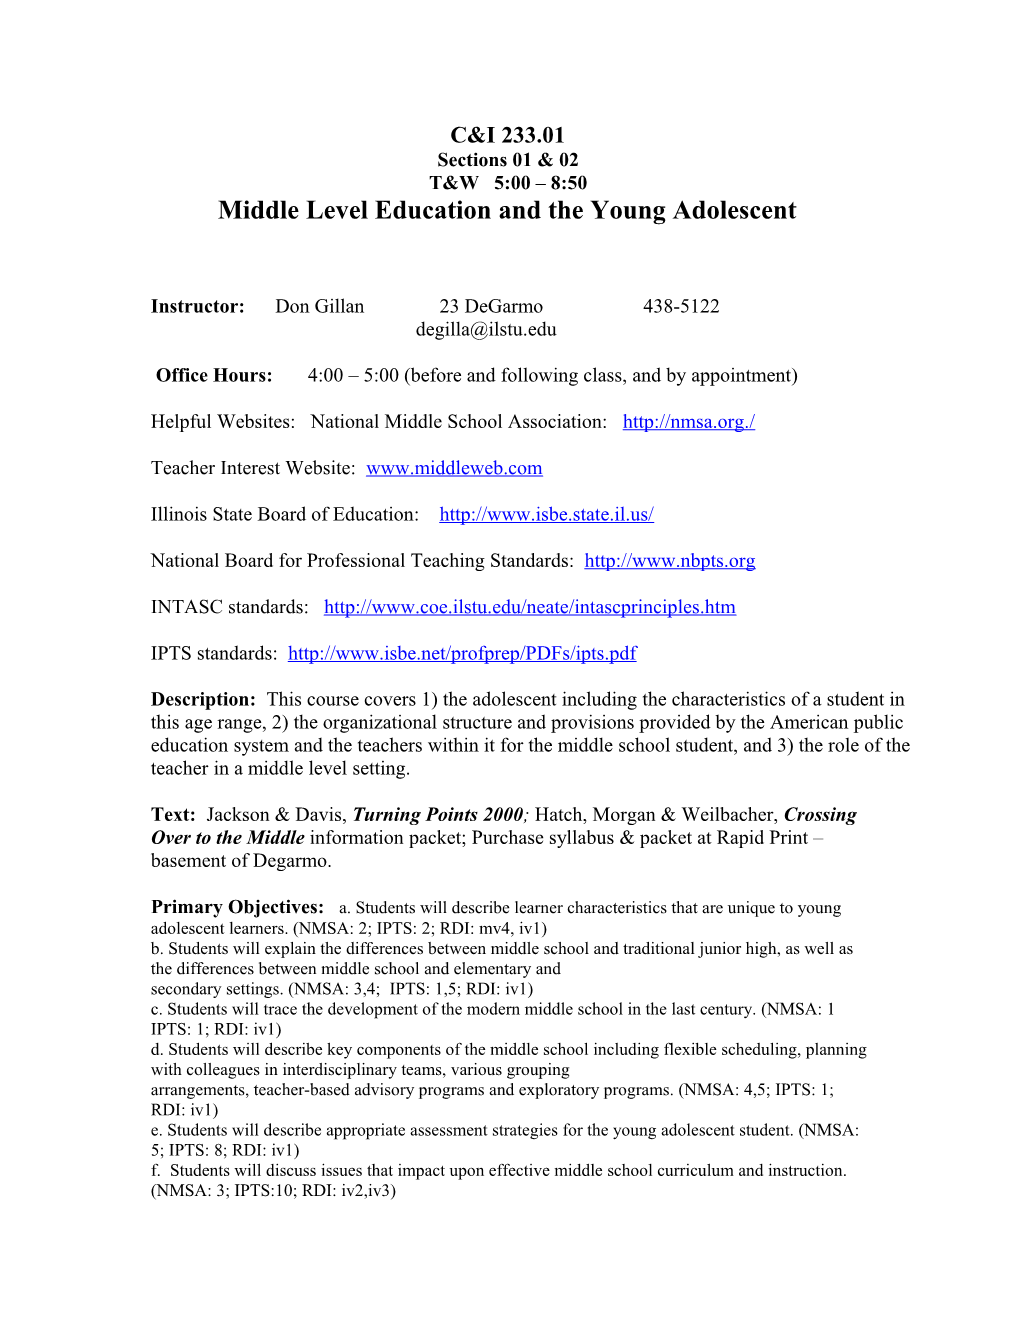 T&W 5:00 8:50 Middle Level Education and the Young Adolescent